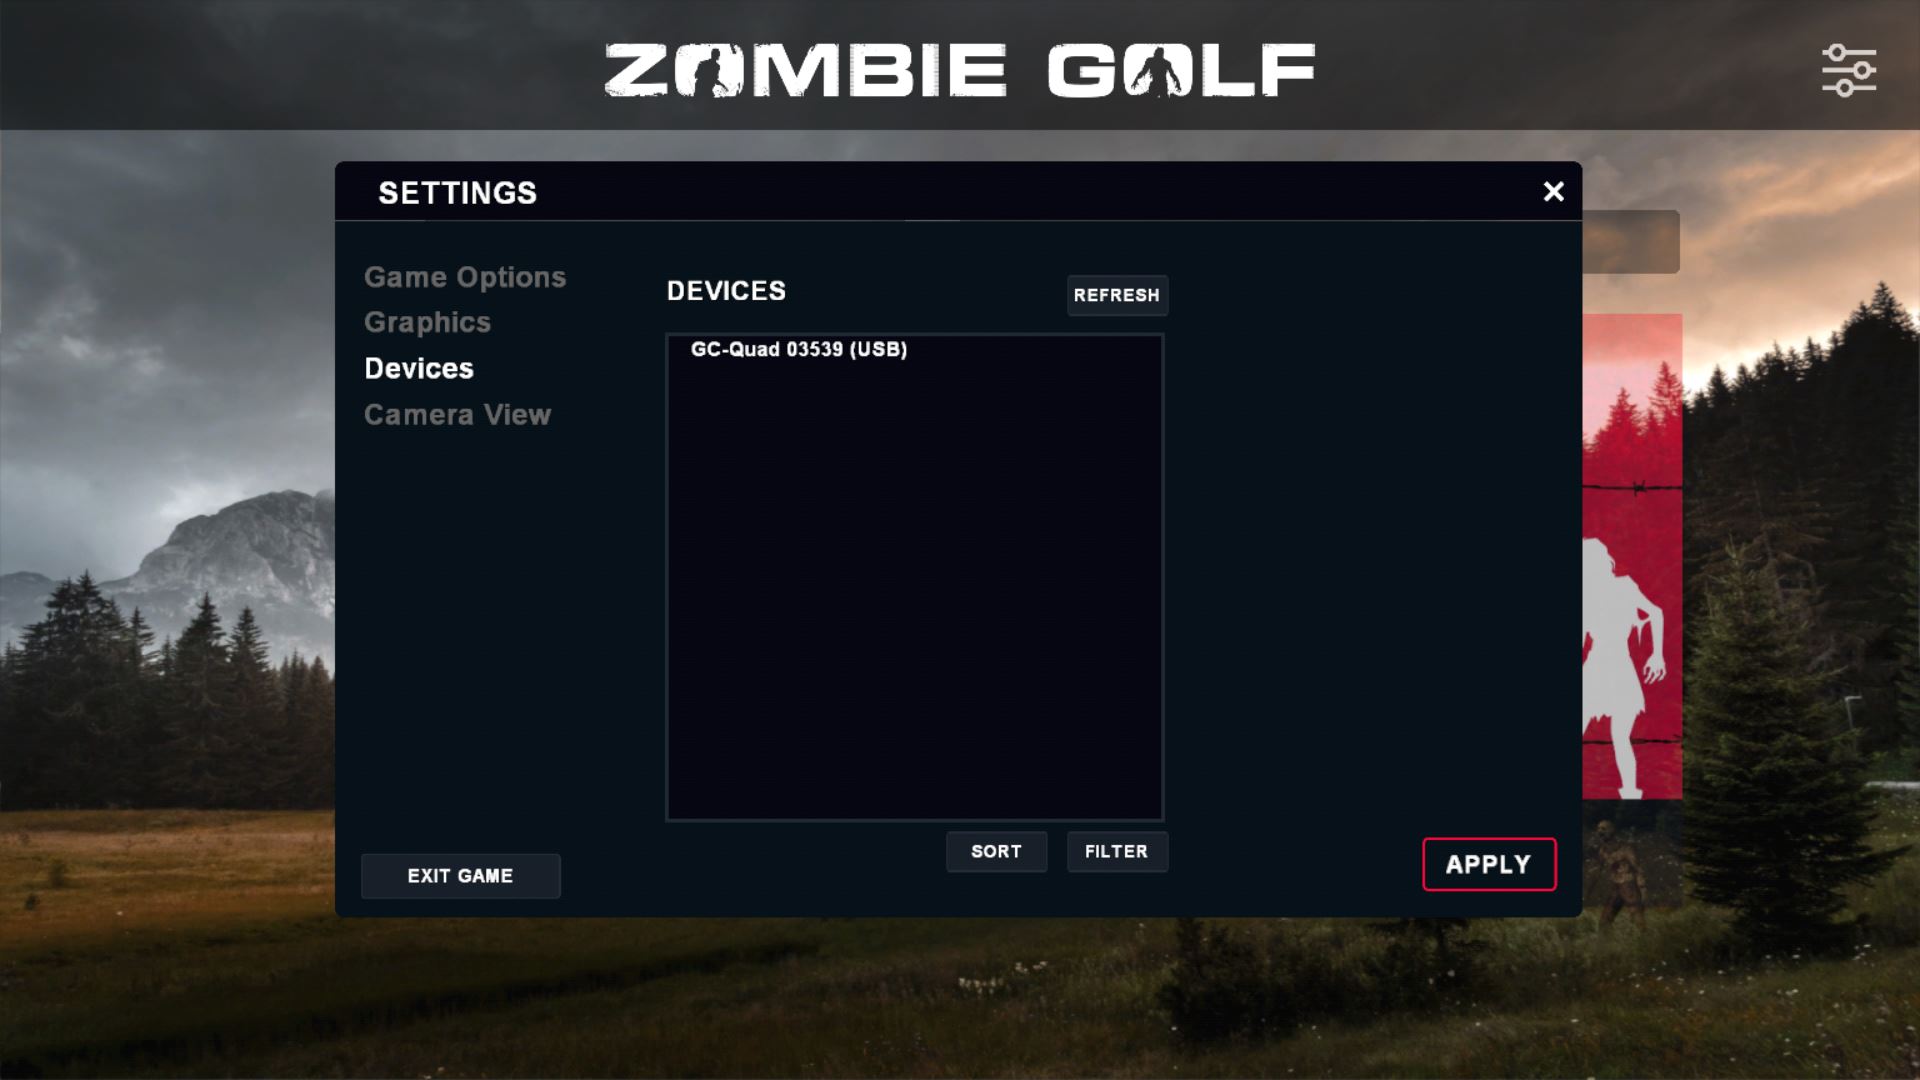 Zombie Golf Game Settings Devices 